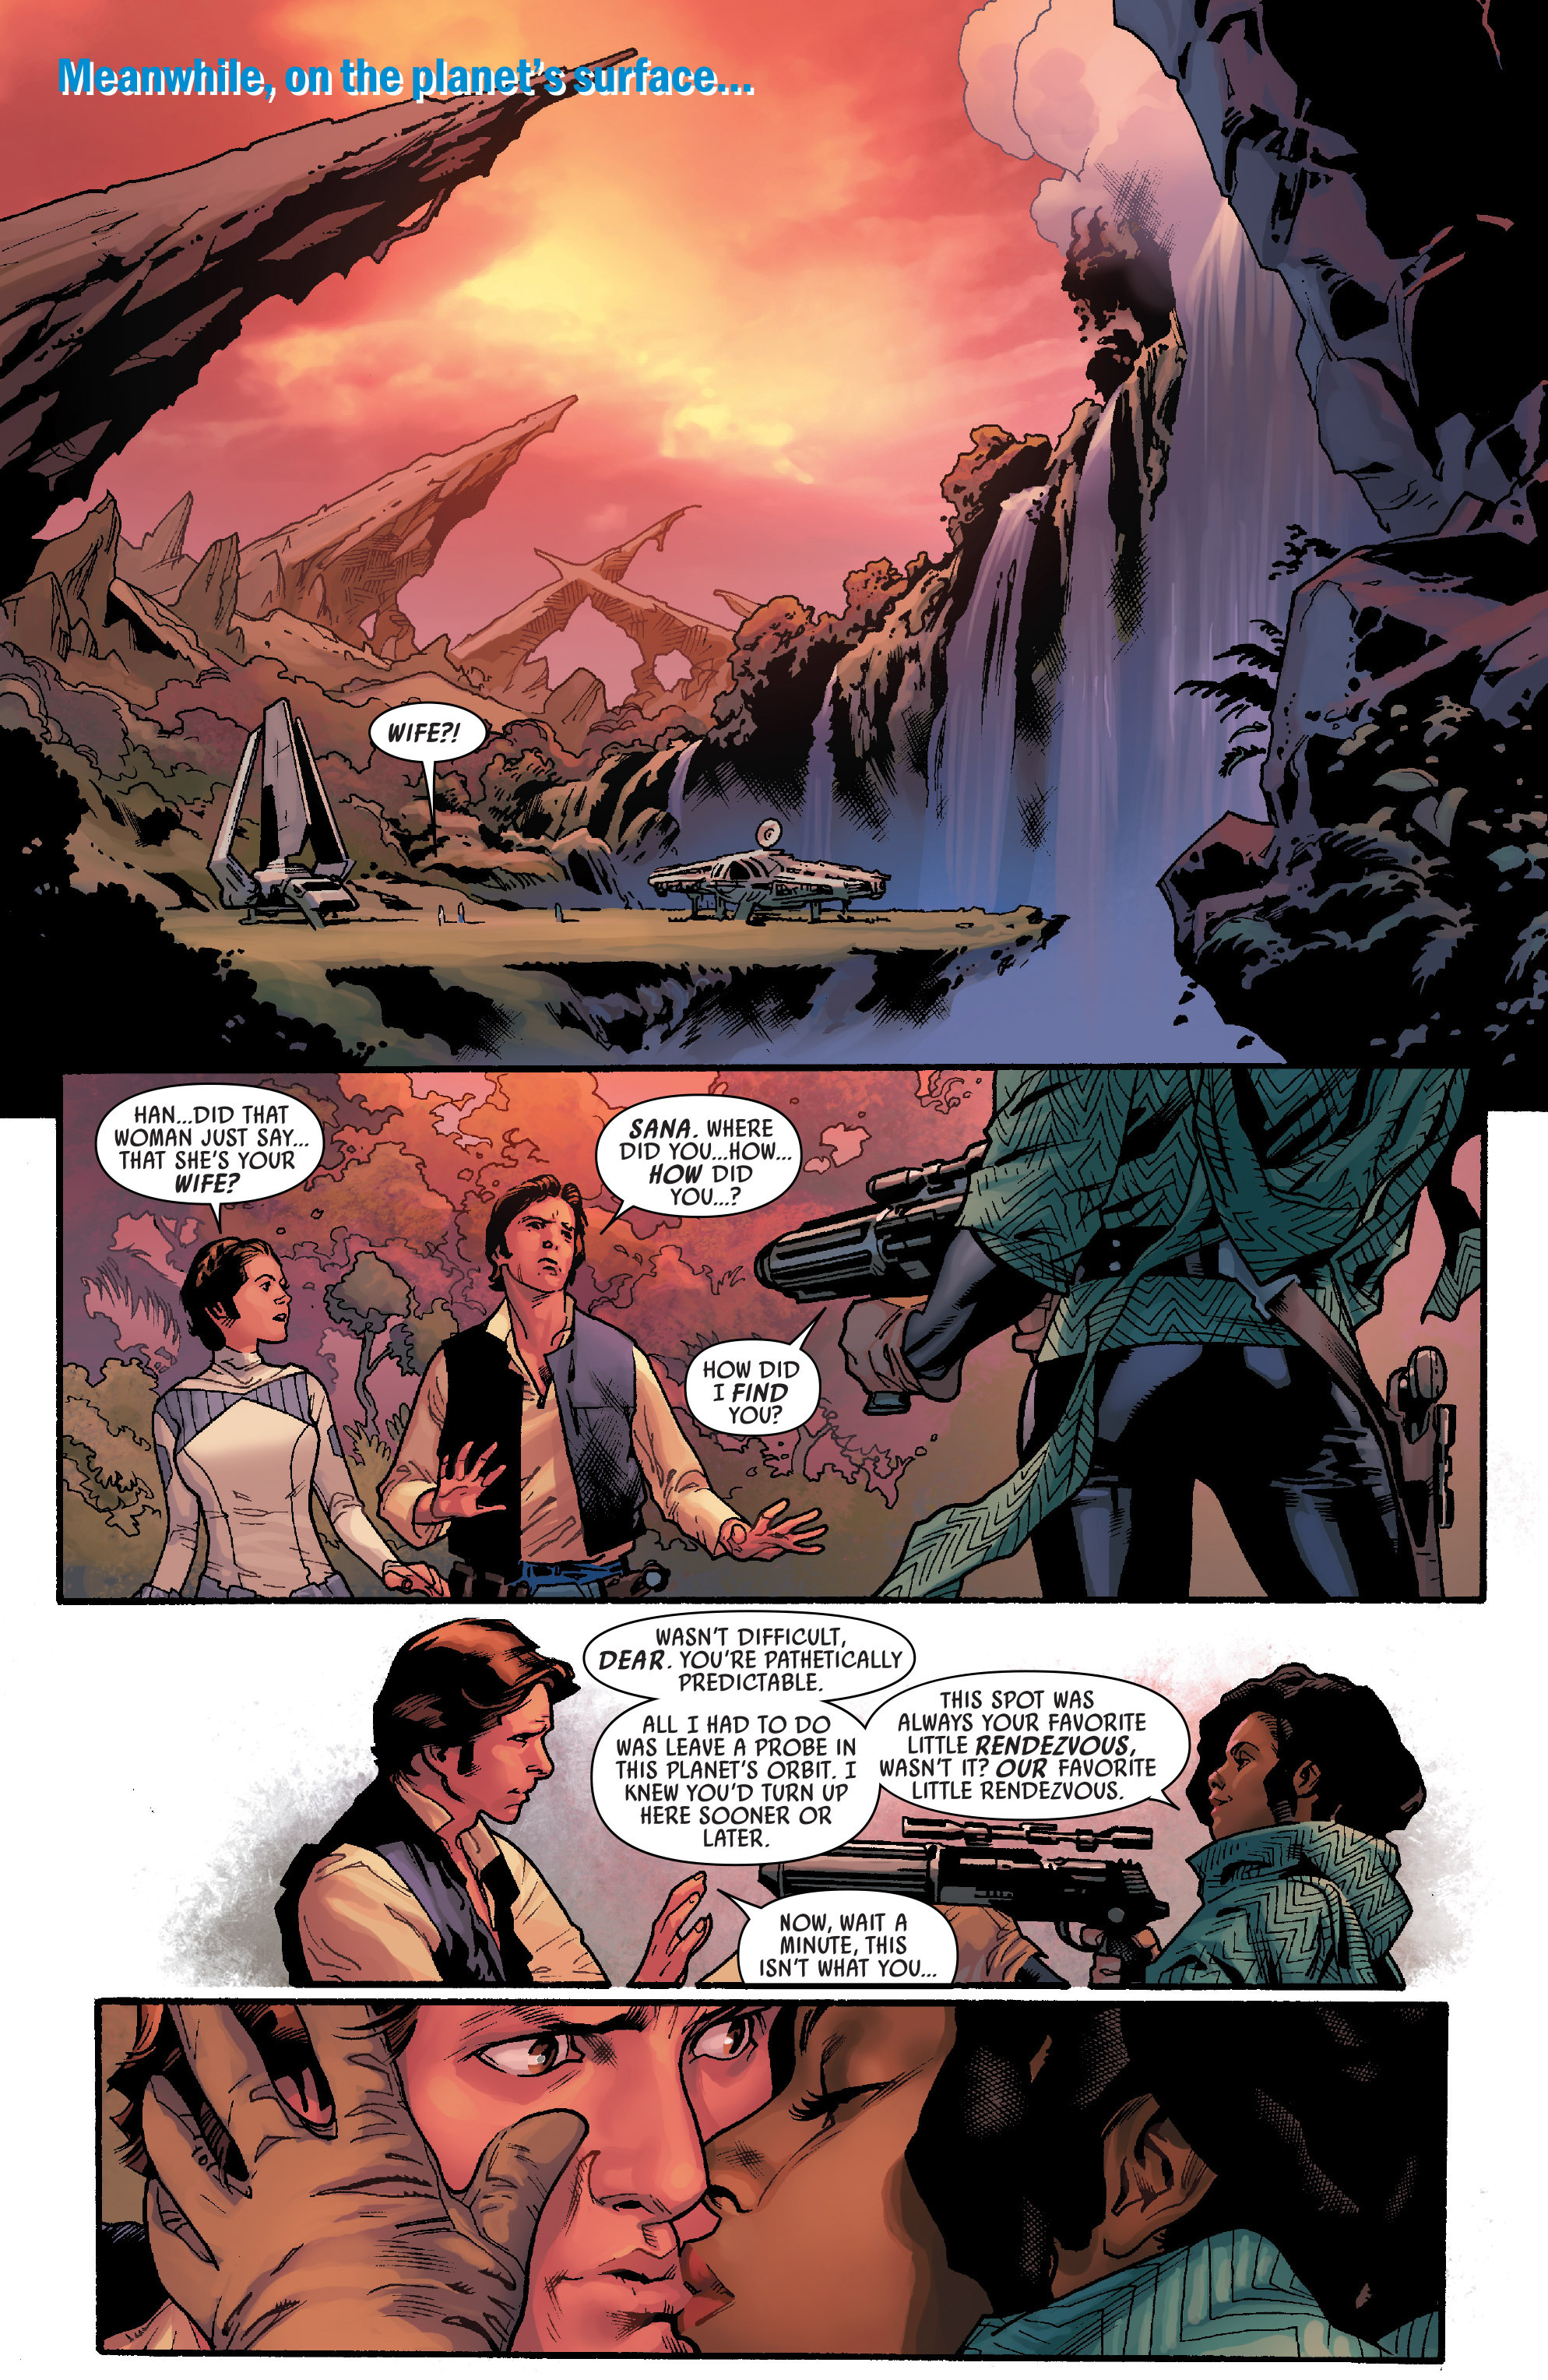 Star Wars (2015-): Chapter 8 - Page 4